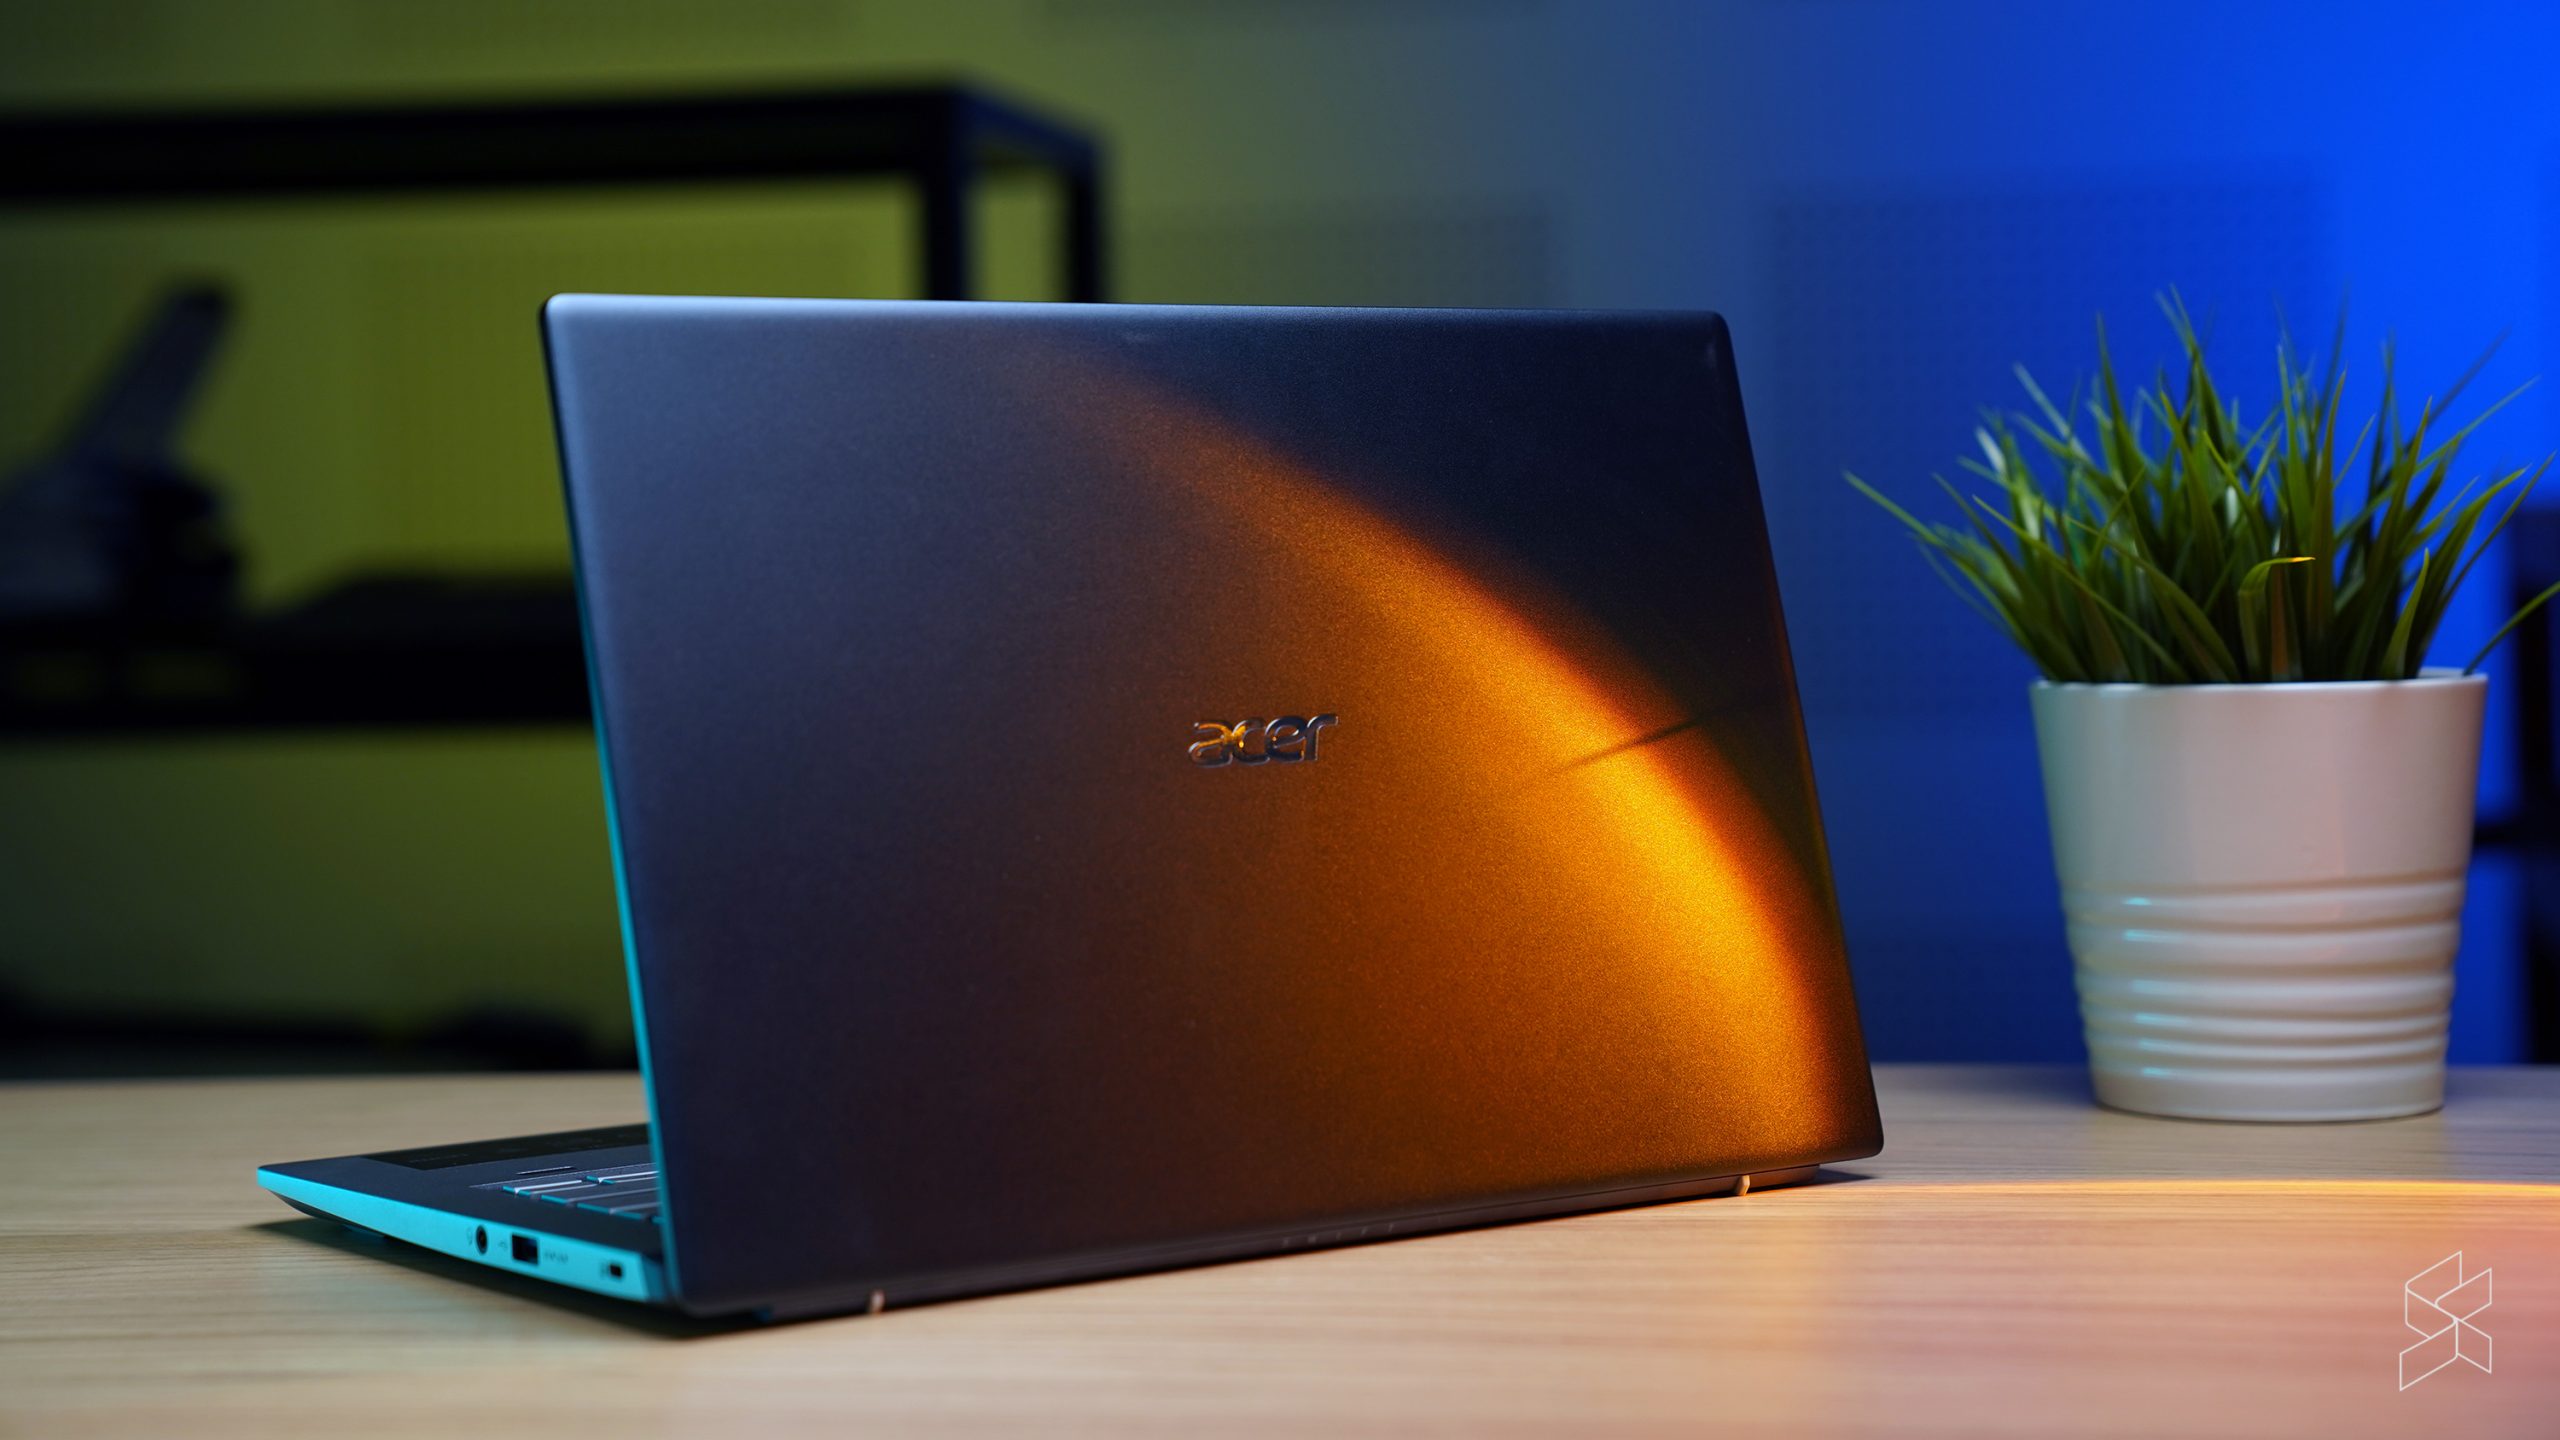 Acer Aspire 5 review: Packs a serious punch for the price